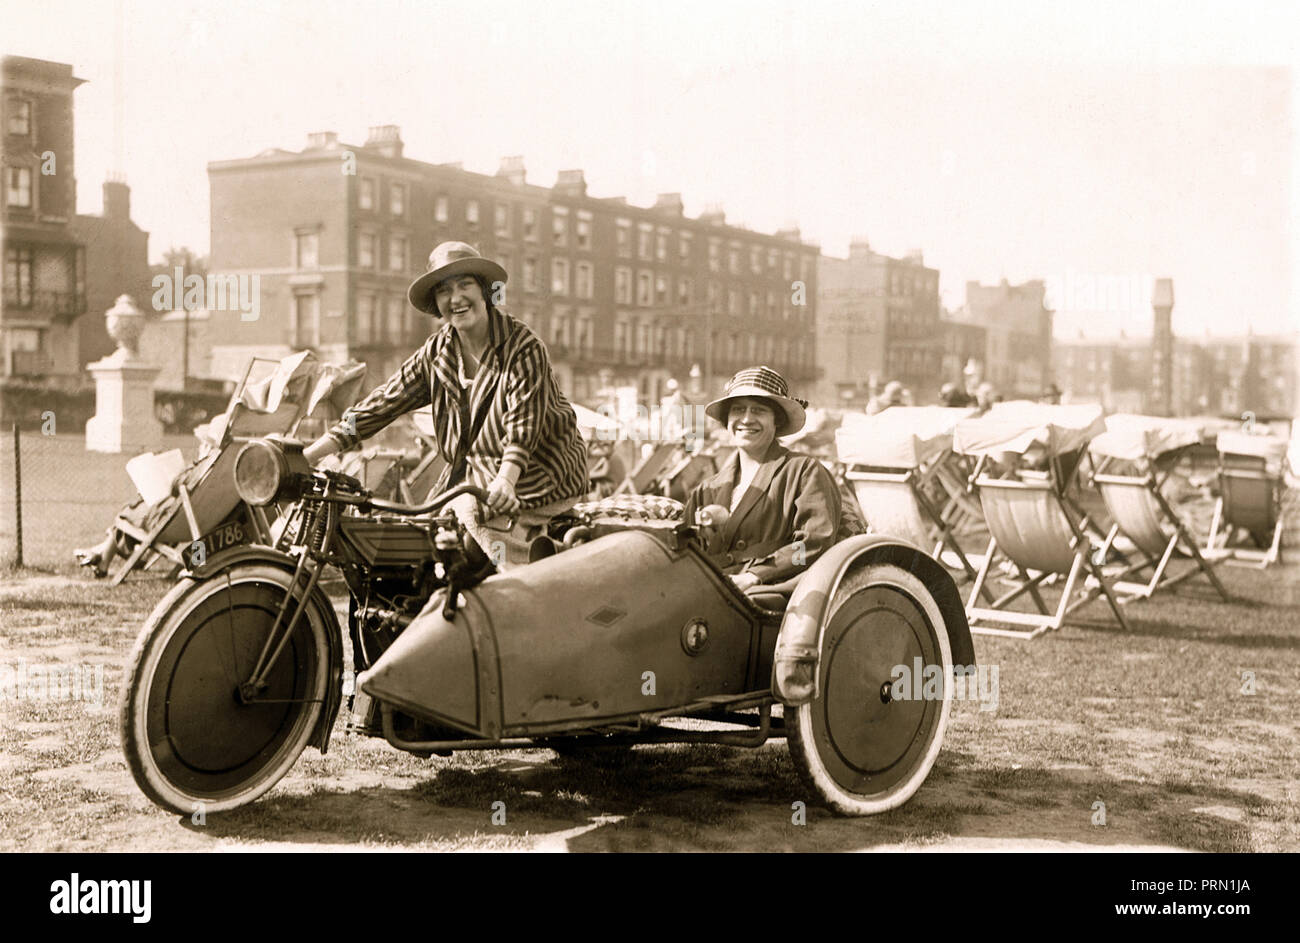 Two stylish ladies pose for photograph on a veteran motorcycle & sidecar combination at the seaside, circa 1915 Stock Photo